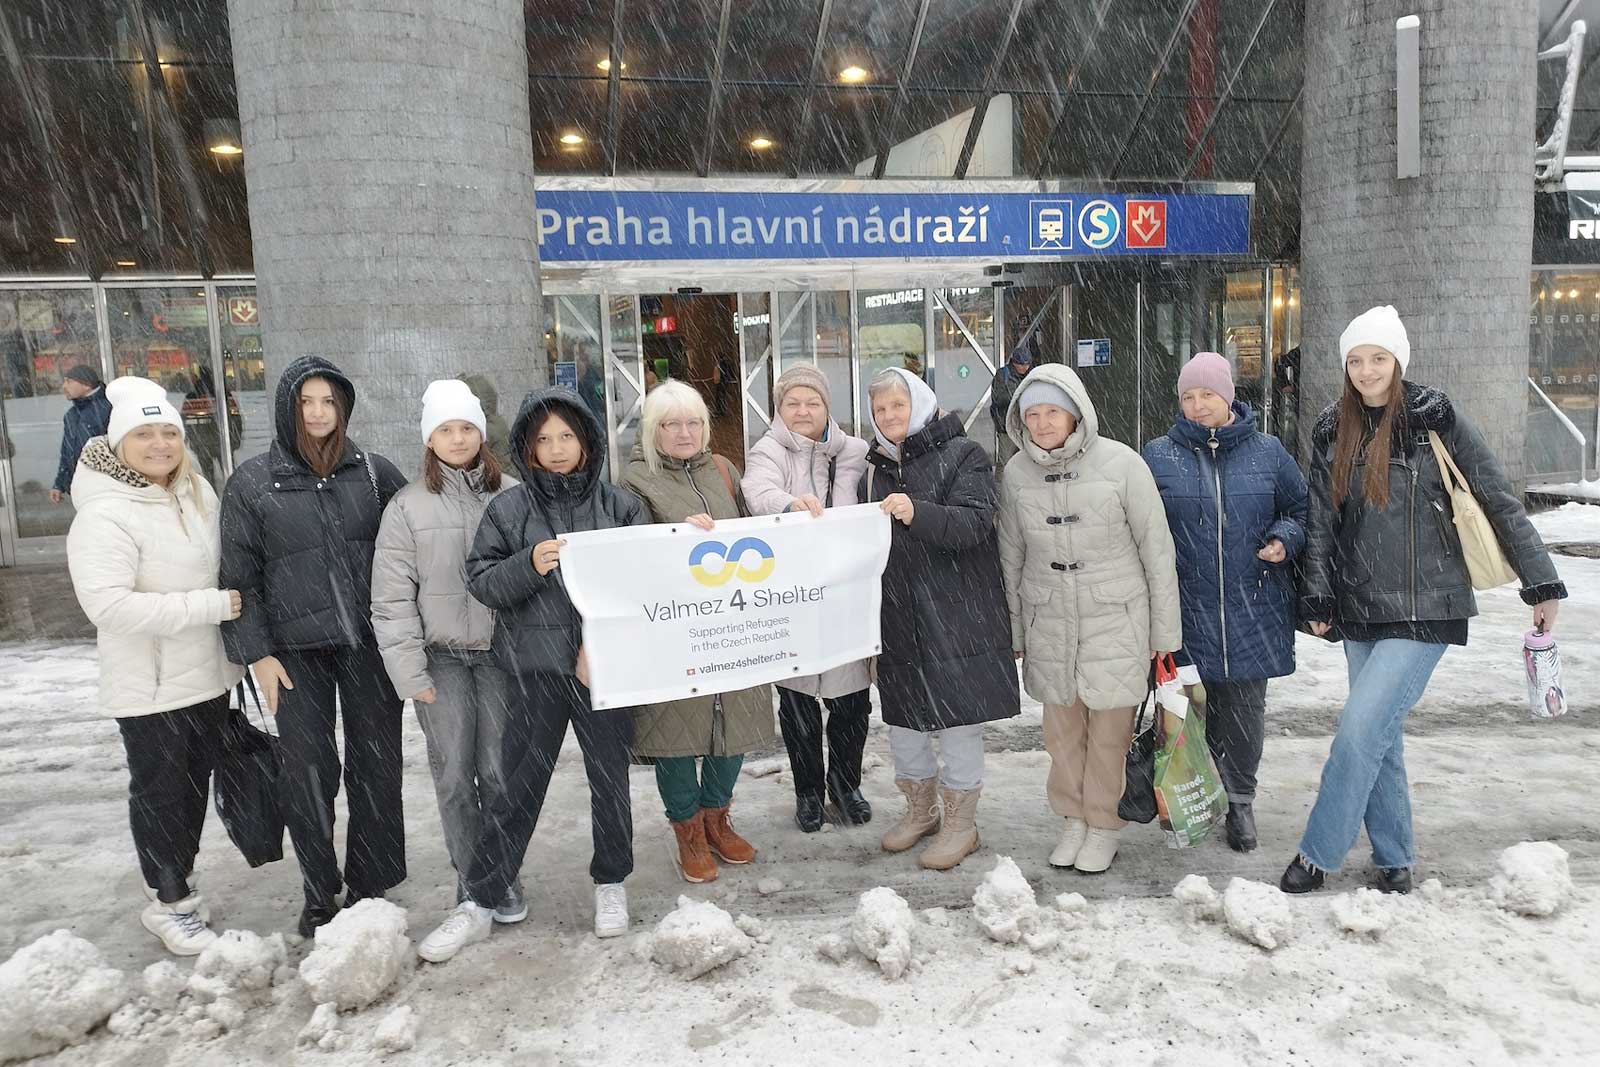 After more than a year in Valmez, a group of Ukrainian women visit the capital of their host country for the first time.